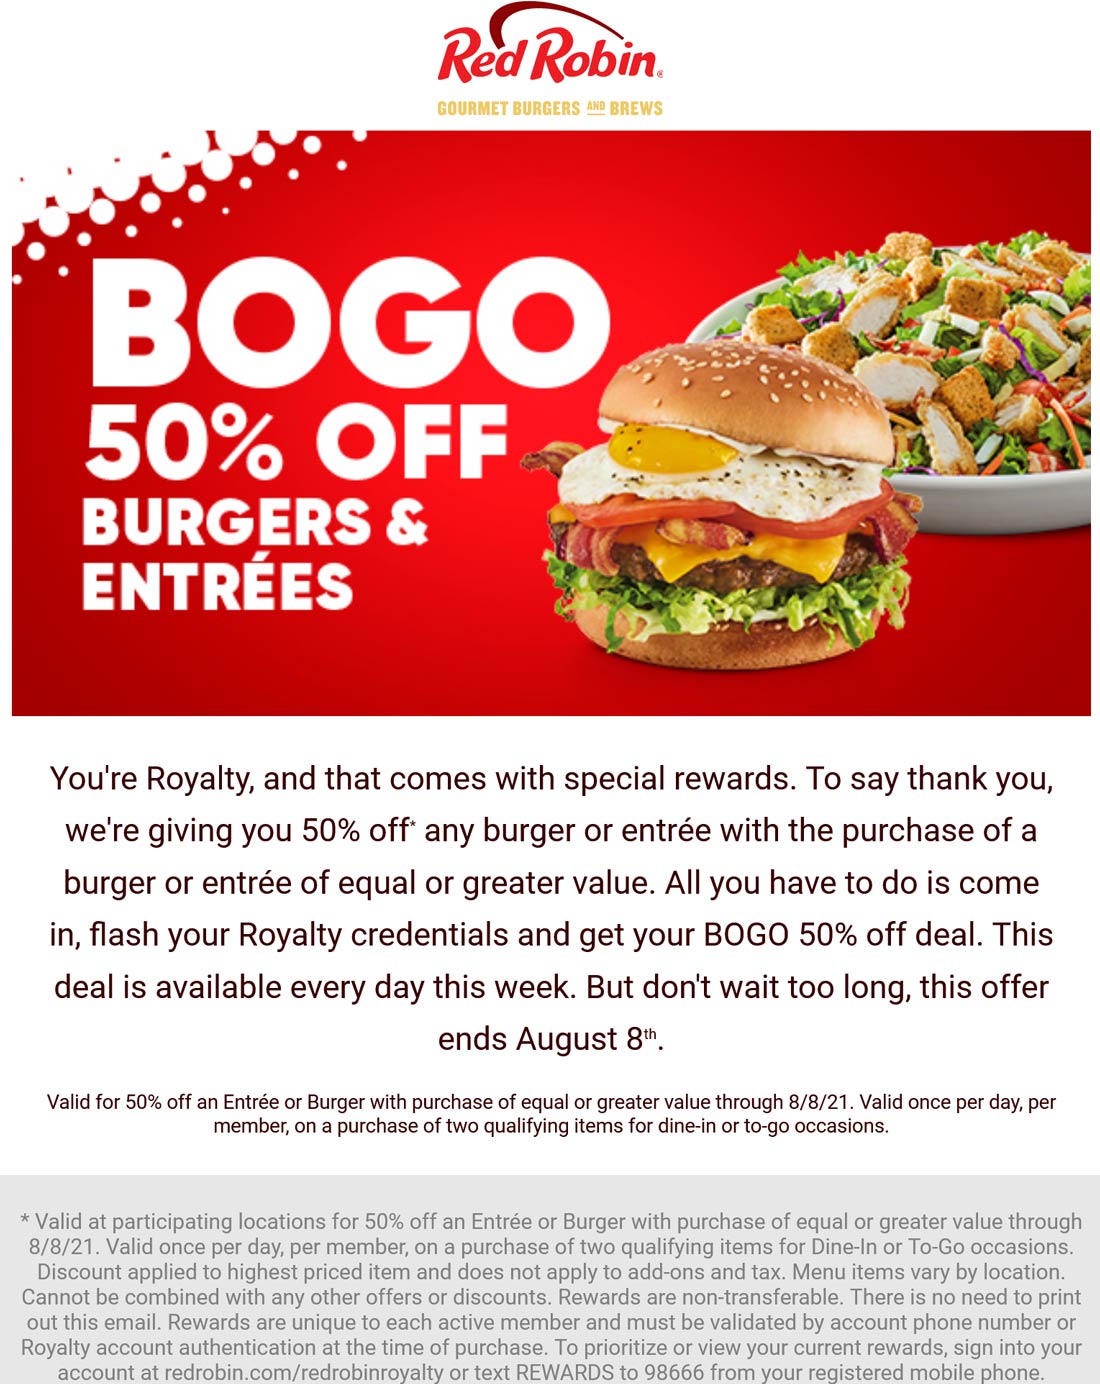 Red Robin restaurants Coupon  Second entree & burger 50% off for members at Red Robin #redrobin 